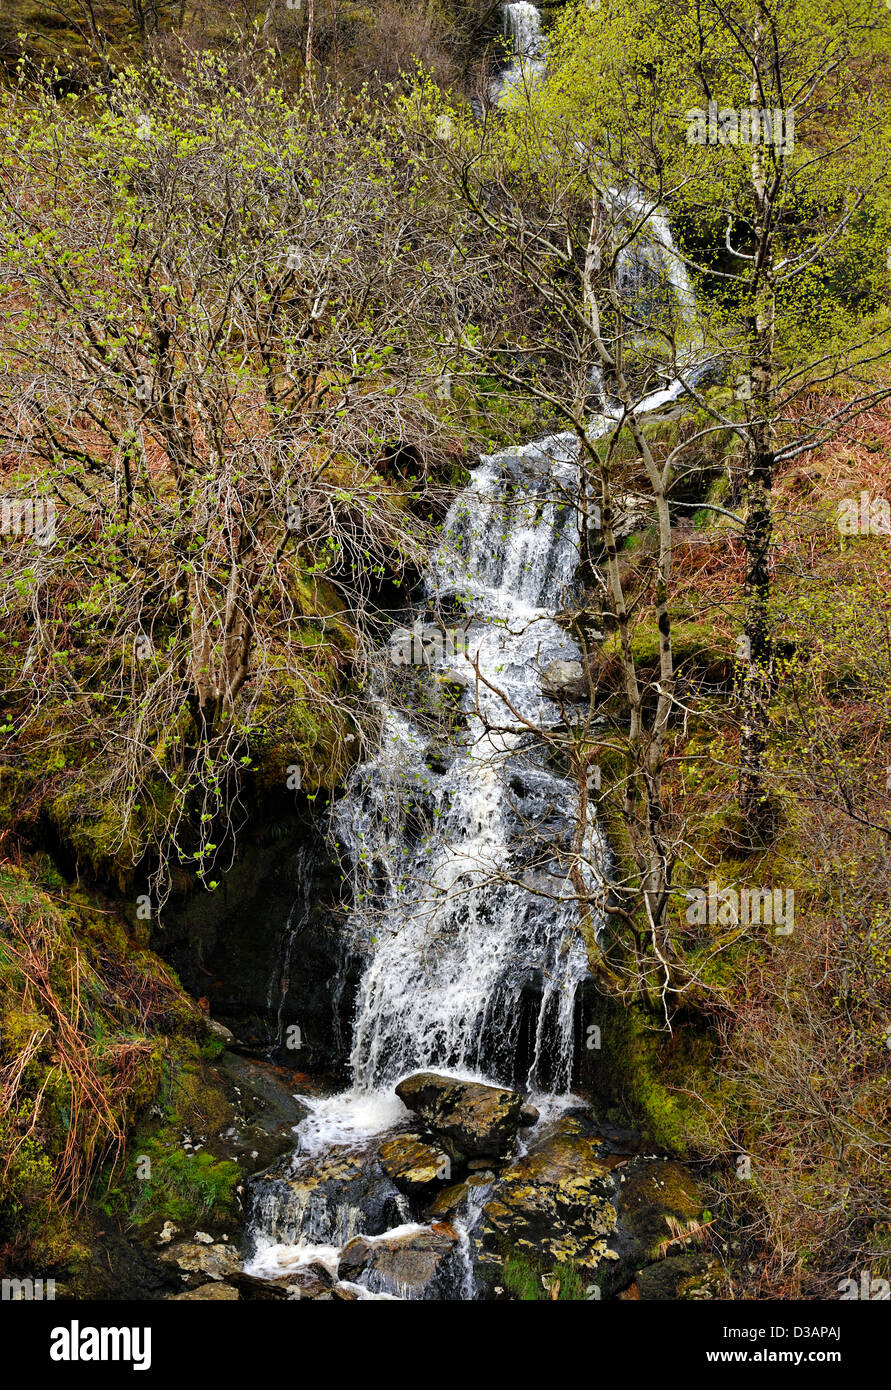 A series of cascades in a mountain stream coming down into Glen Ogle, Perthshire, Scotland Stock Photo